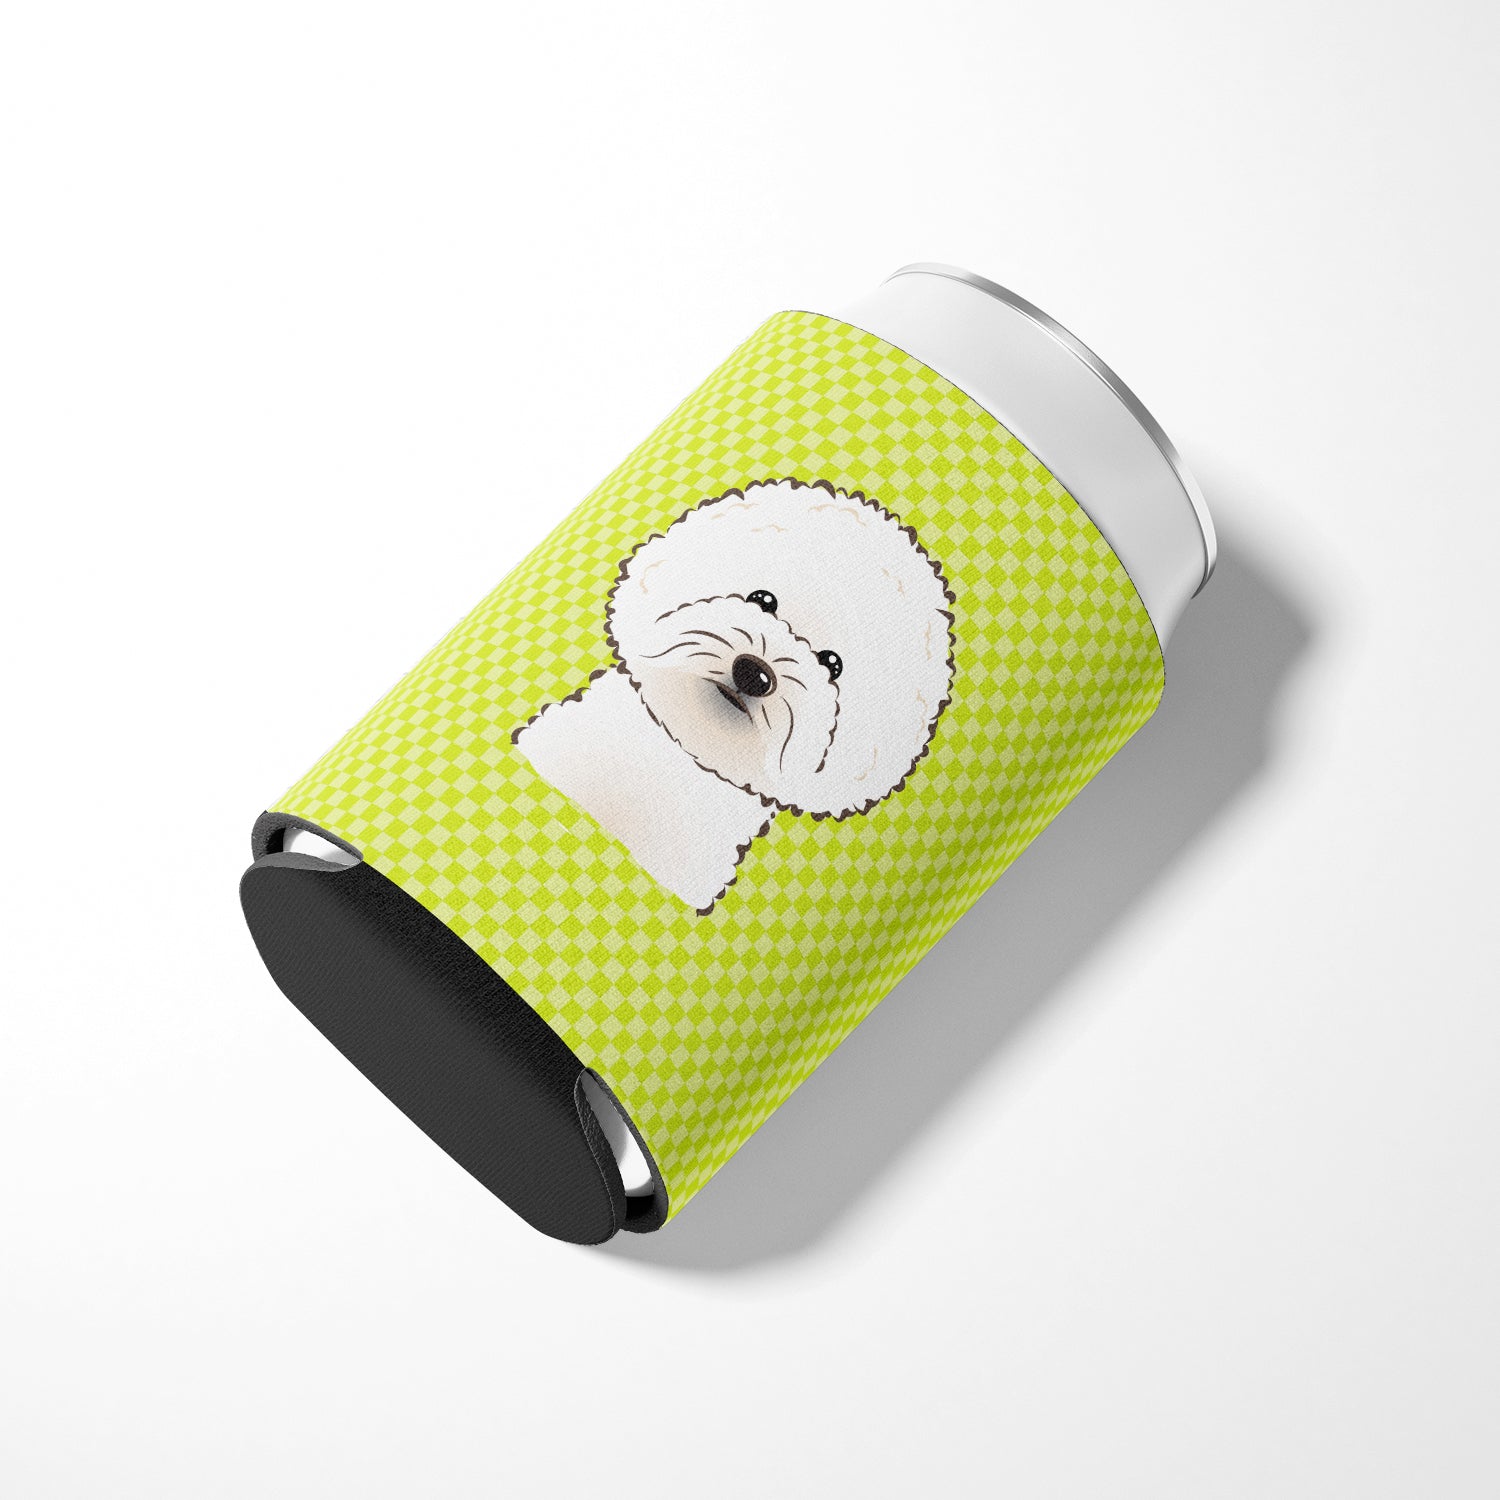 Checkerboard Lime Green Bichon Frise Can or Bottle Hugger BB1279CC.